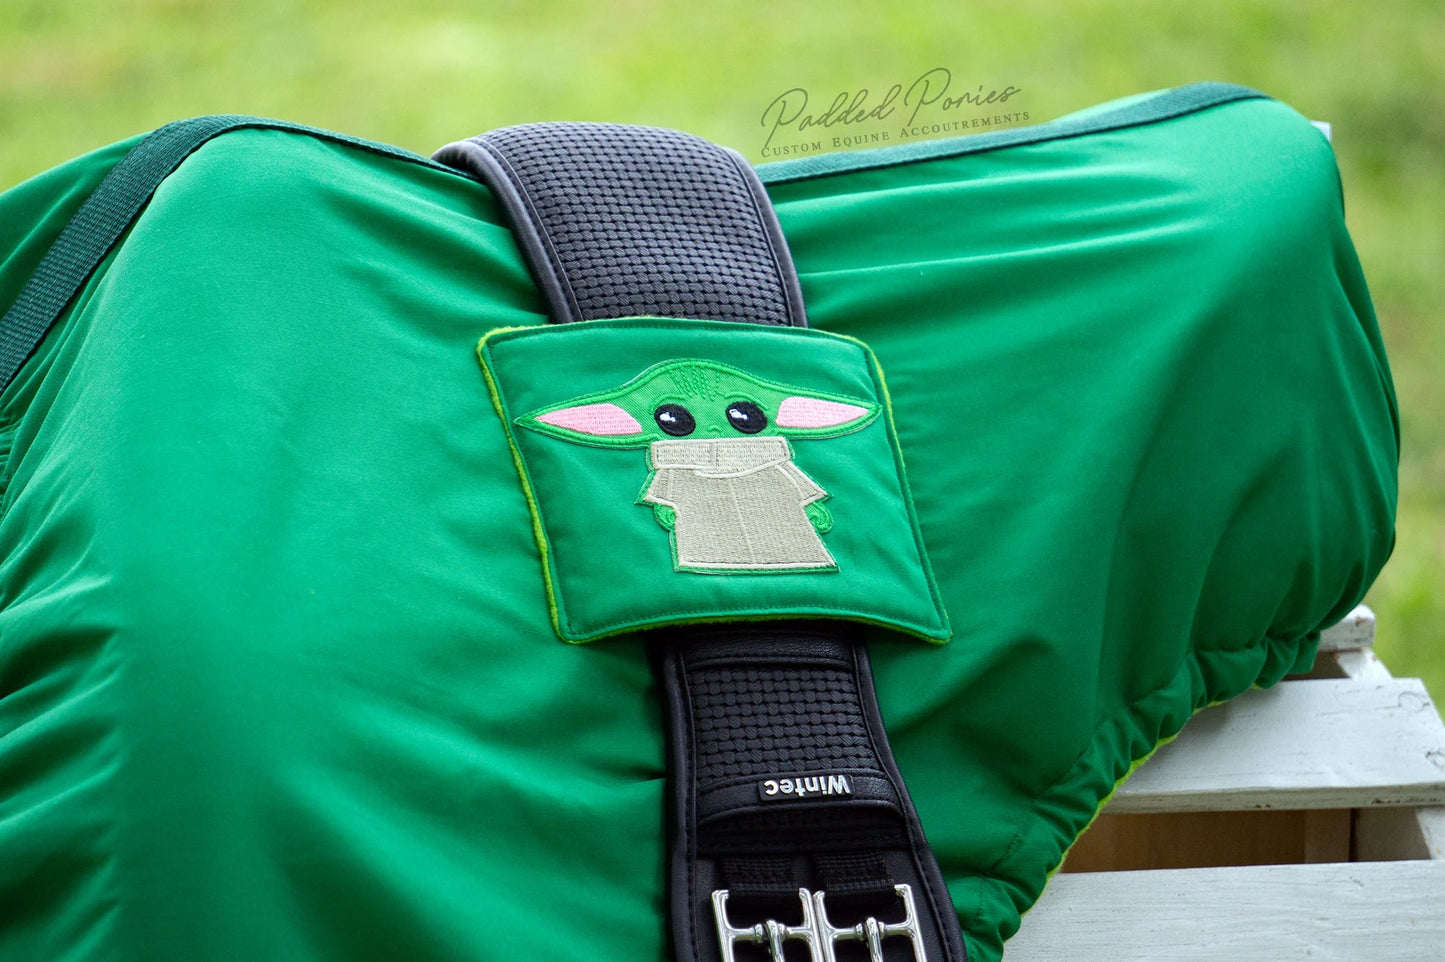 Green Star Wars The Mandalorian Baby Yoda Grogu Patch All Purpose Saddle Cover with Girth Holder Pocket